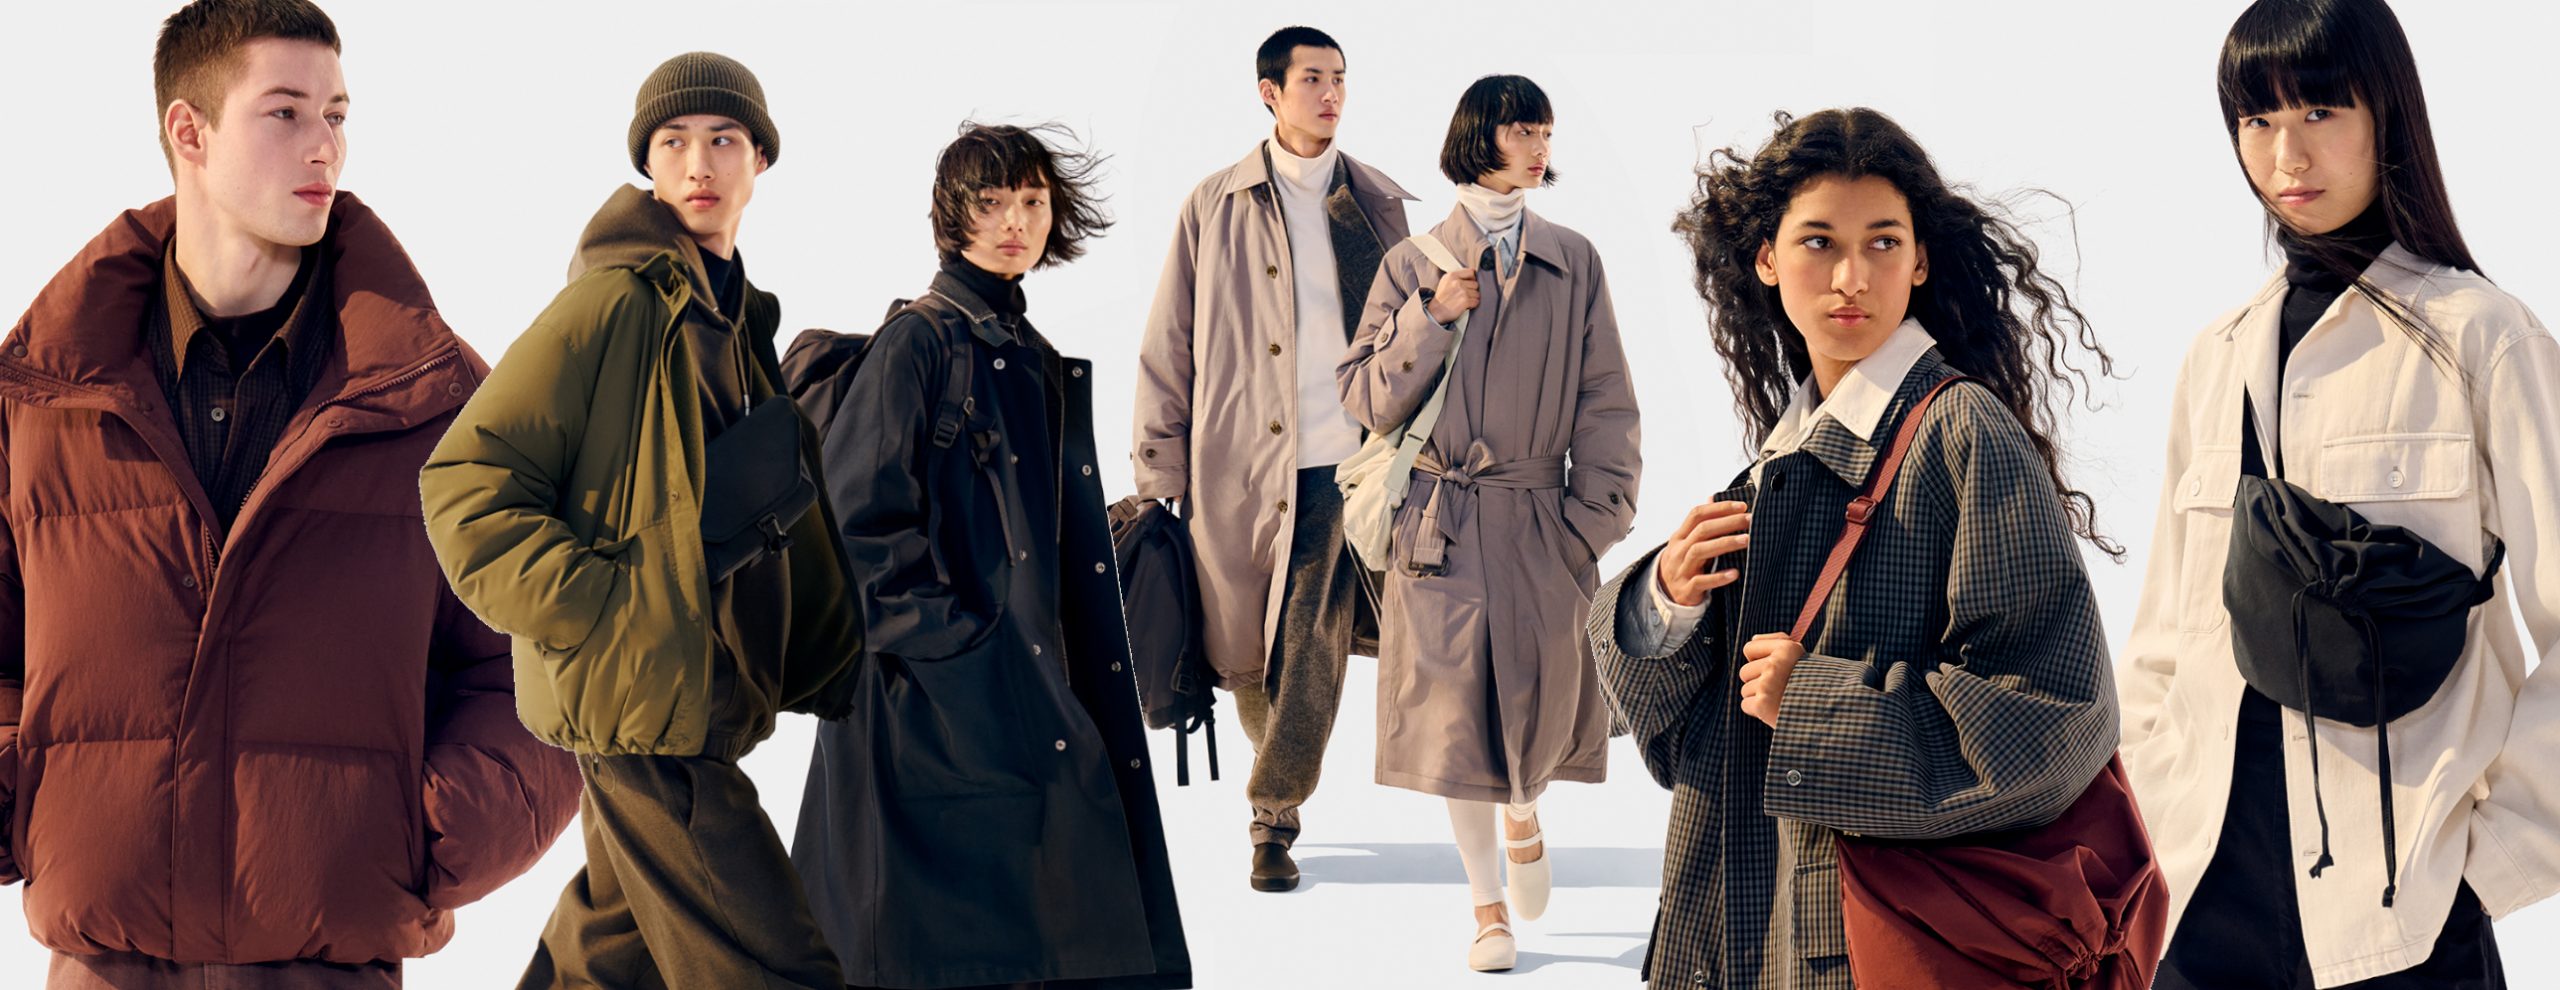 Uniqlo U Returns With Fall/Winter Shades Of Warm Browns And Genderless ...